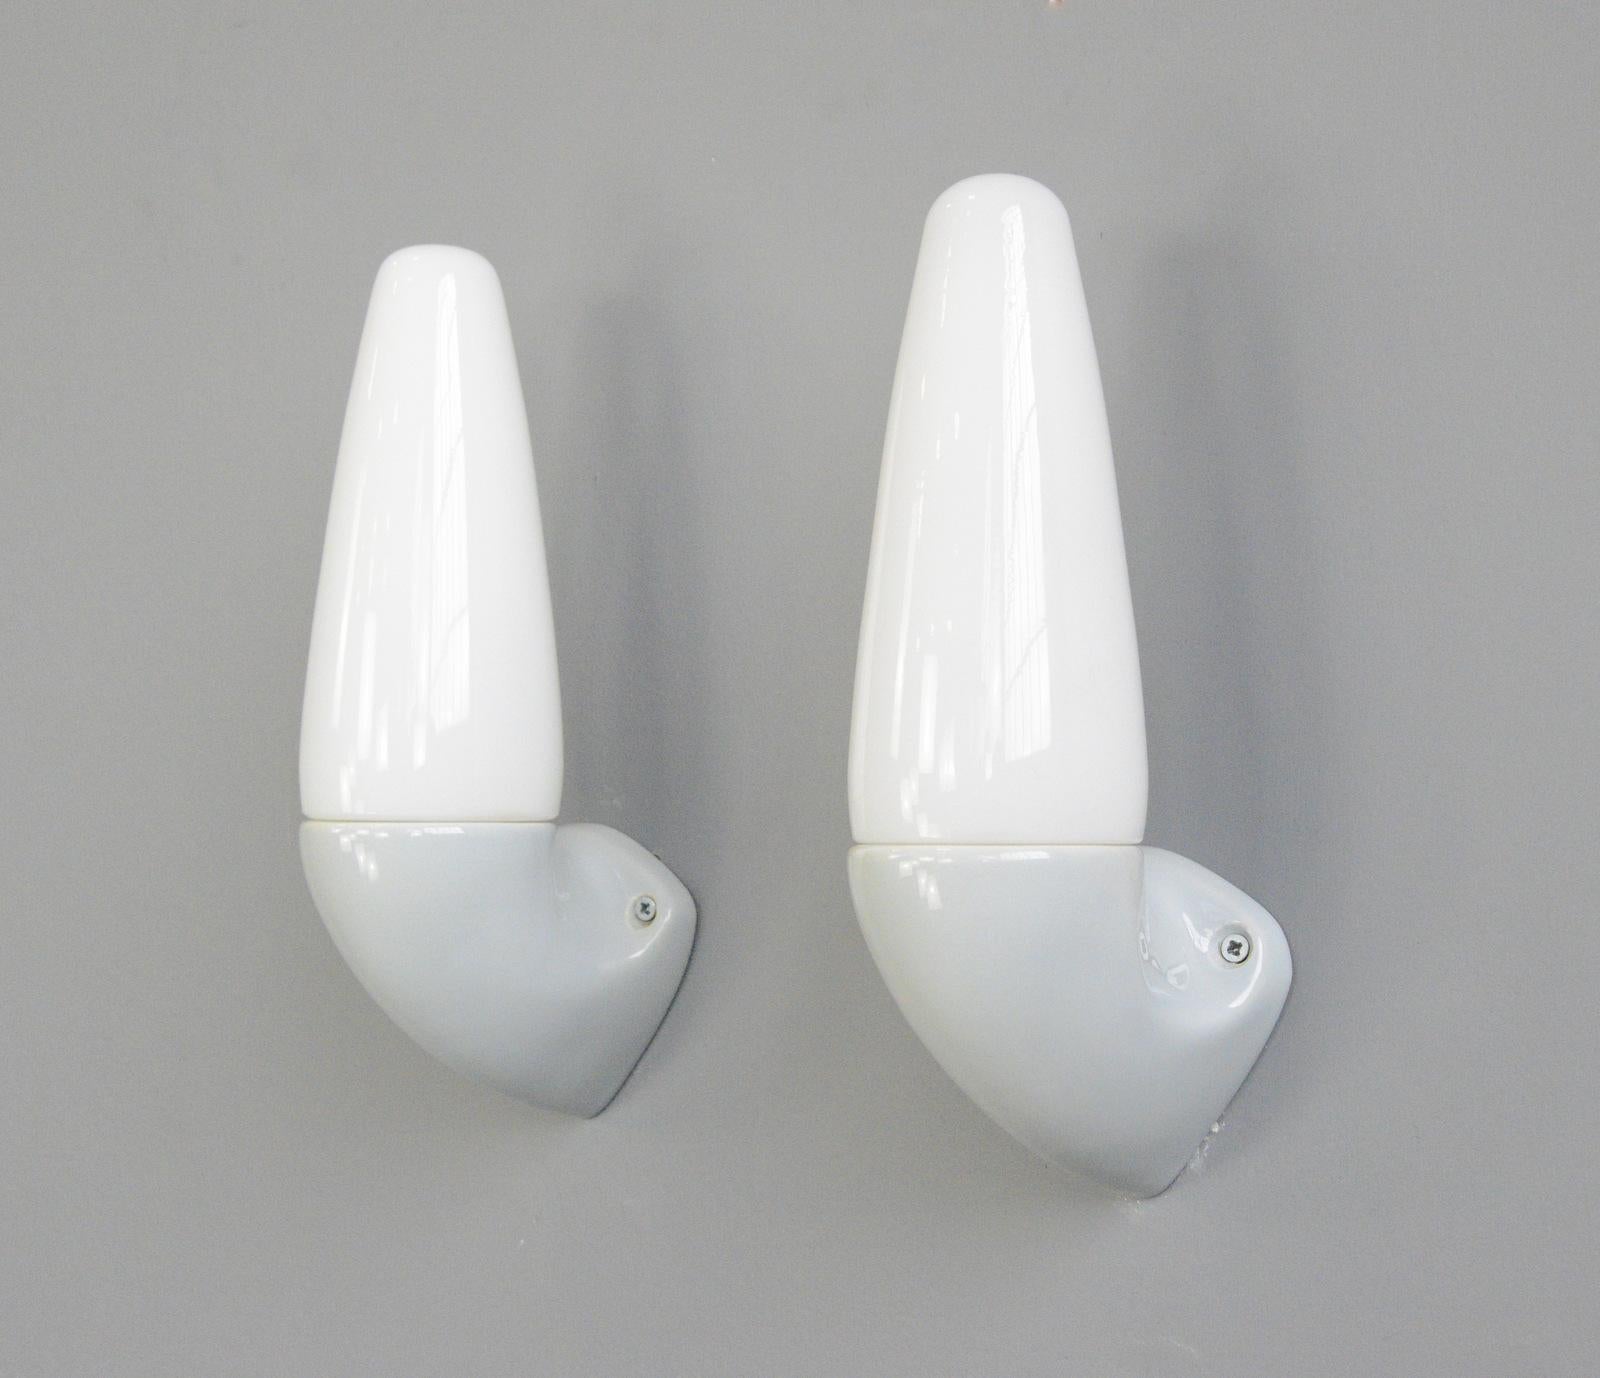 Porcelain Bathroom Lights By Sigvard Bernadotte For Ifo Circa 1950s

- Price is per piece (18 available) 
- Vitreous grey porcelain wall mounts
- Screw off opaline shades
- Takes E27 fitting bulbs
- Wires directly into the wall
- Designed by